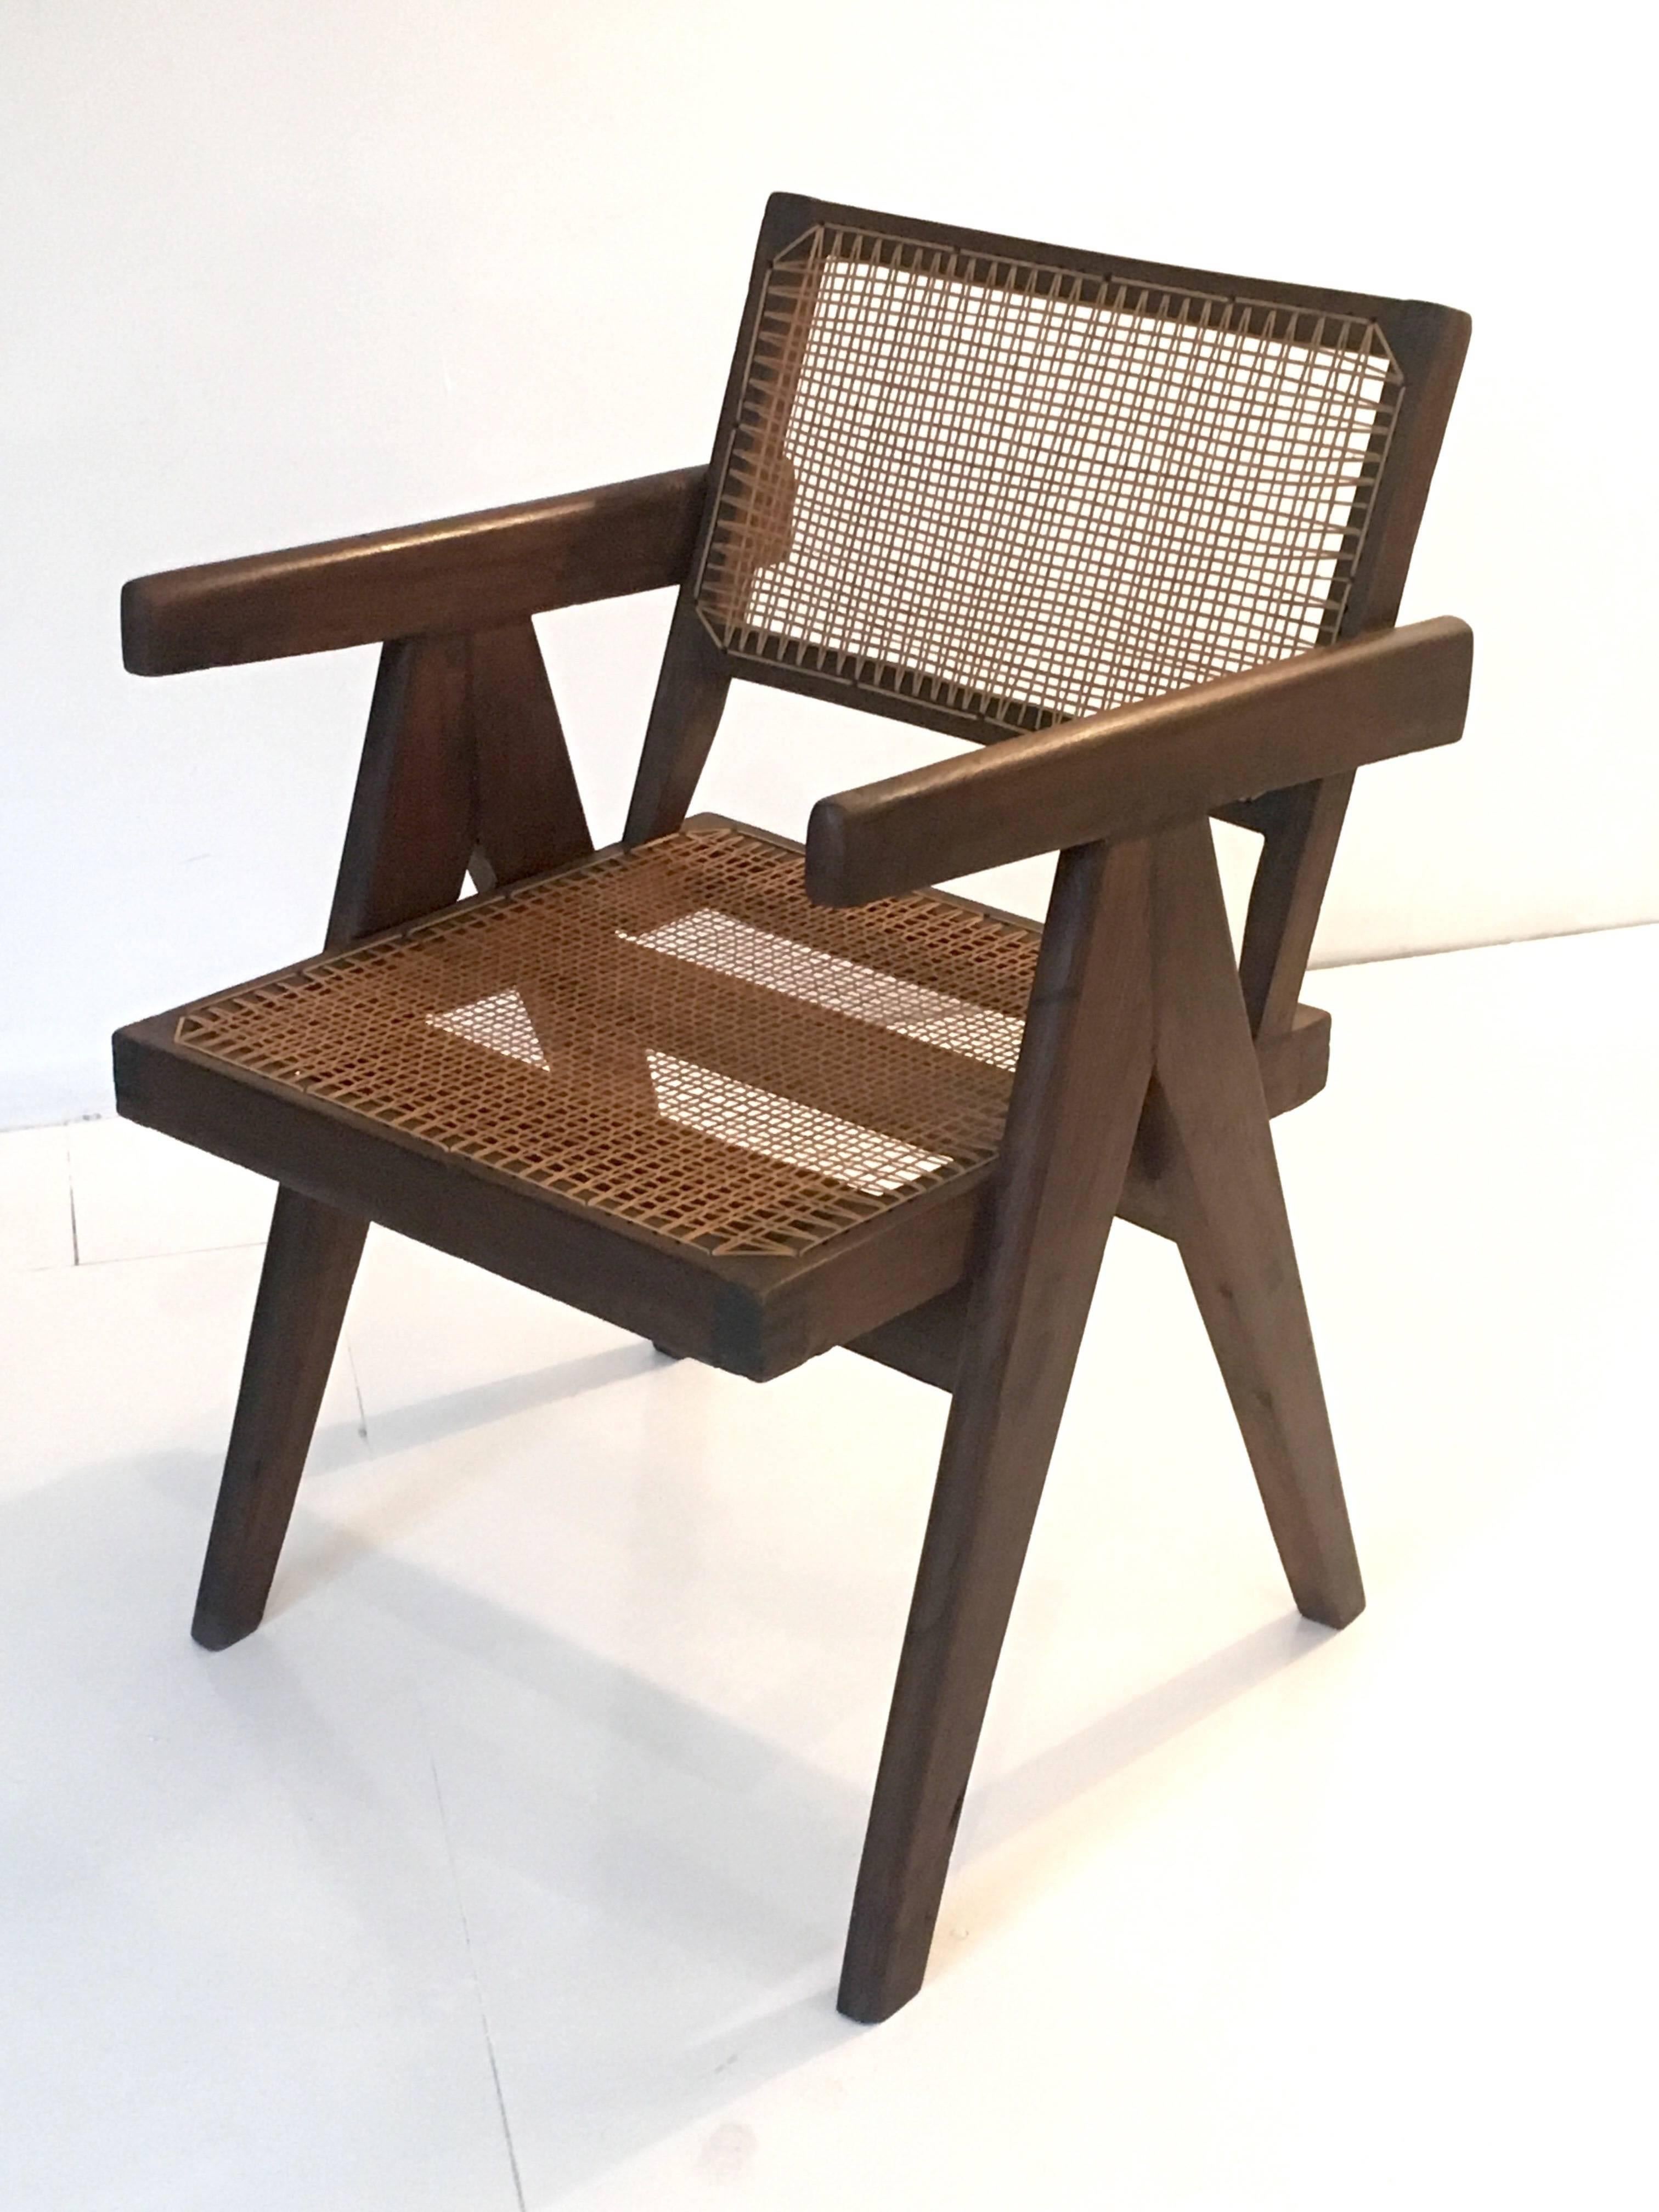 Indian Teak Office Cane Chair Armchair by Pierre Jeanneret from Chandigarh